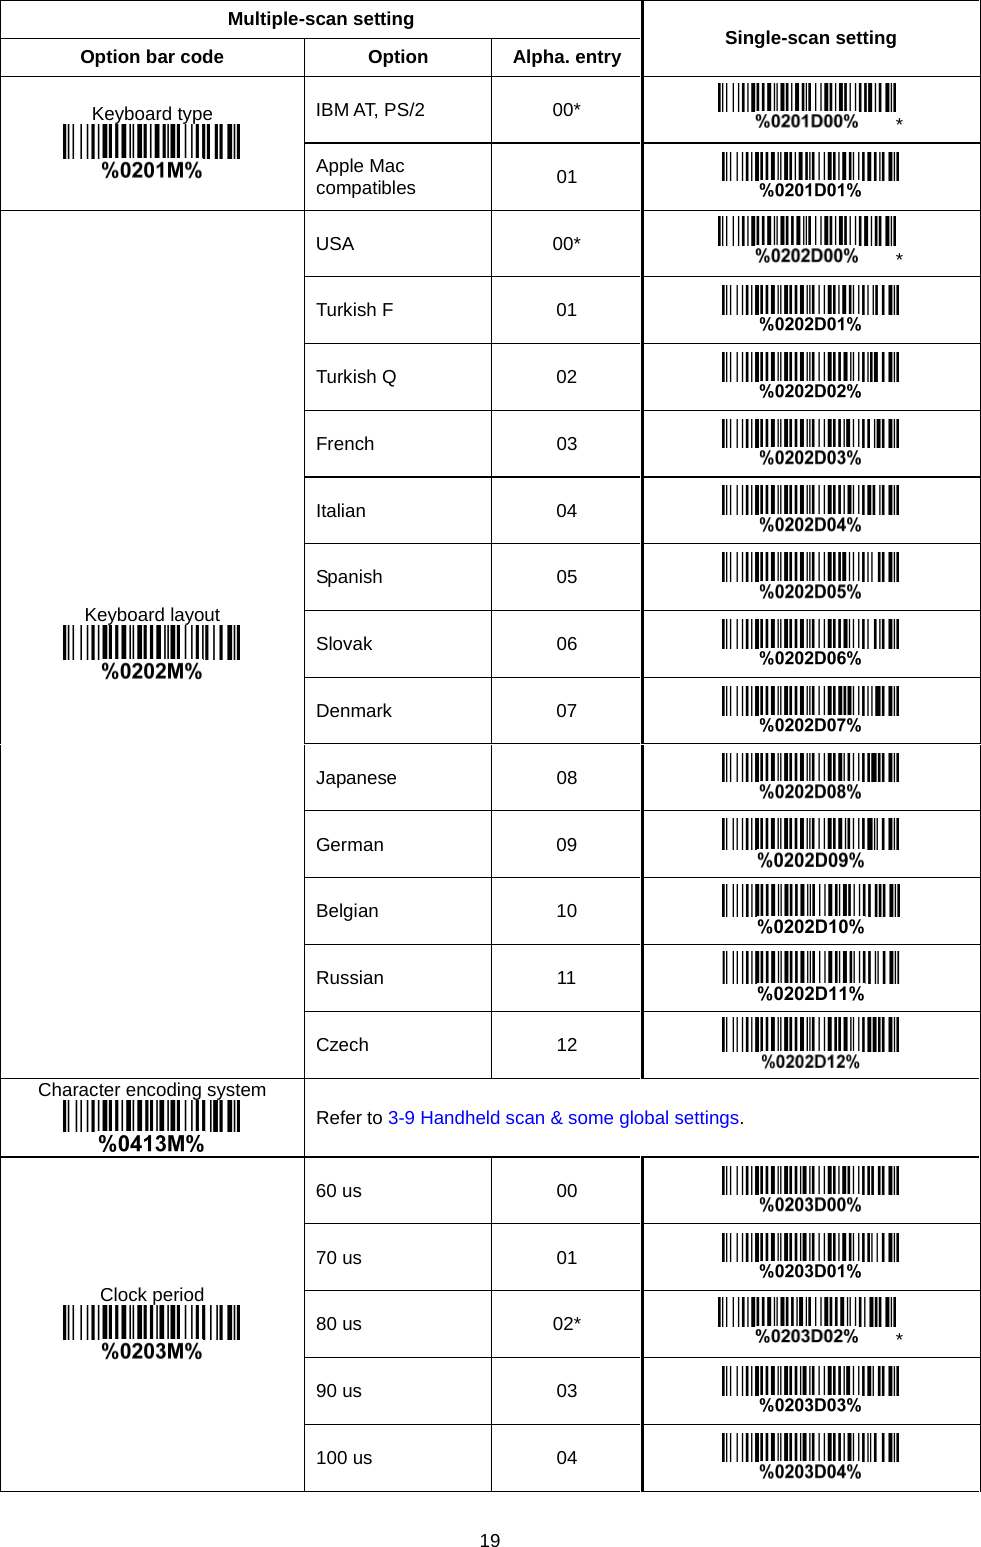 19  Multiple-scan setting Single-scan setting Option bar code Option Alpha. entry Keyboard type  IBM AT, PS/2 00* * Apple Mac compatibles 01  Keyboard layout  USA 00* * Turkish F 01  Turkish Q 02  French 03  Italian 04  Spanish 05  Slovak 06  Denmark 07  Japanese 08  German 09  Belgian 10  Russian 11  Czech 12  Character encoding system  Refer to 3-9 Handheld scan &amp; some global settings. Clock period    60 us 00  70 us 01  80 us 02* * 90 us 03  100 us 04  